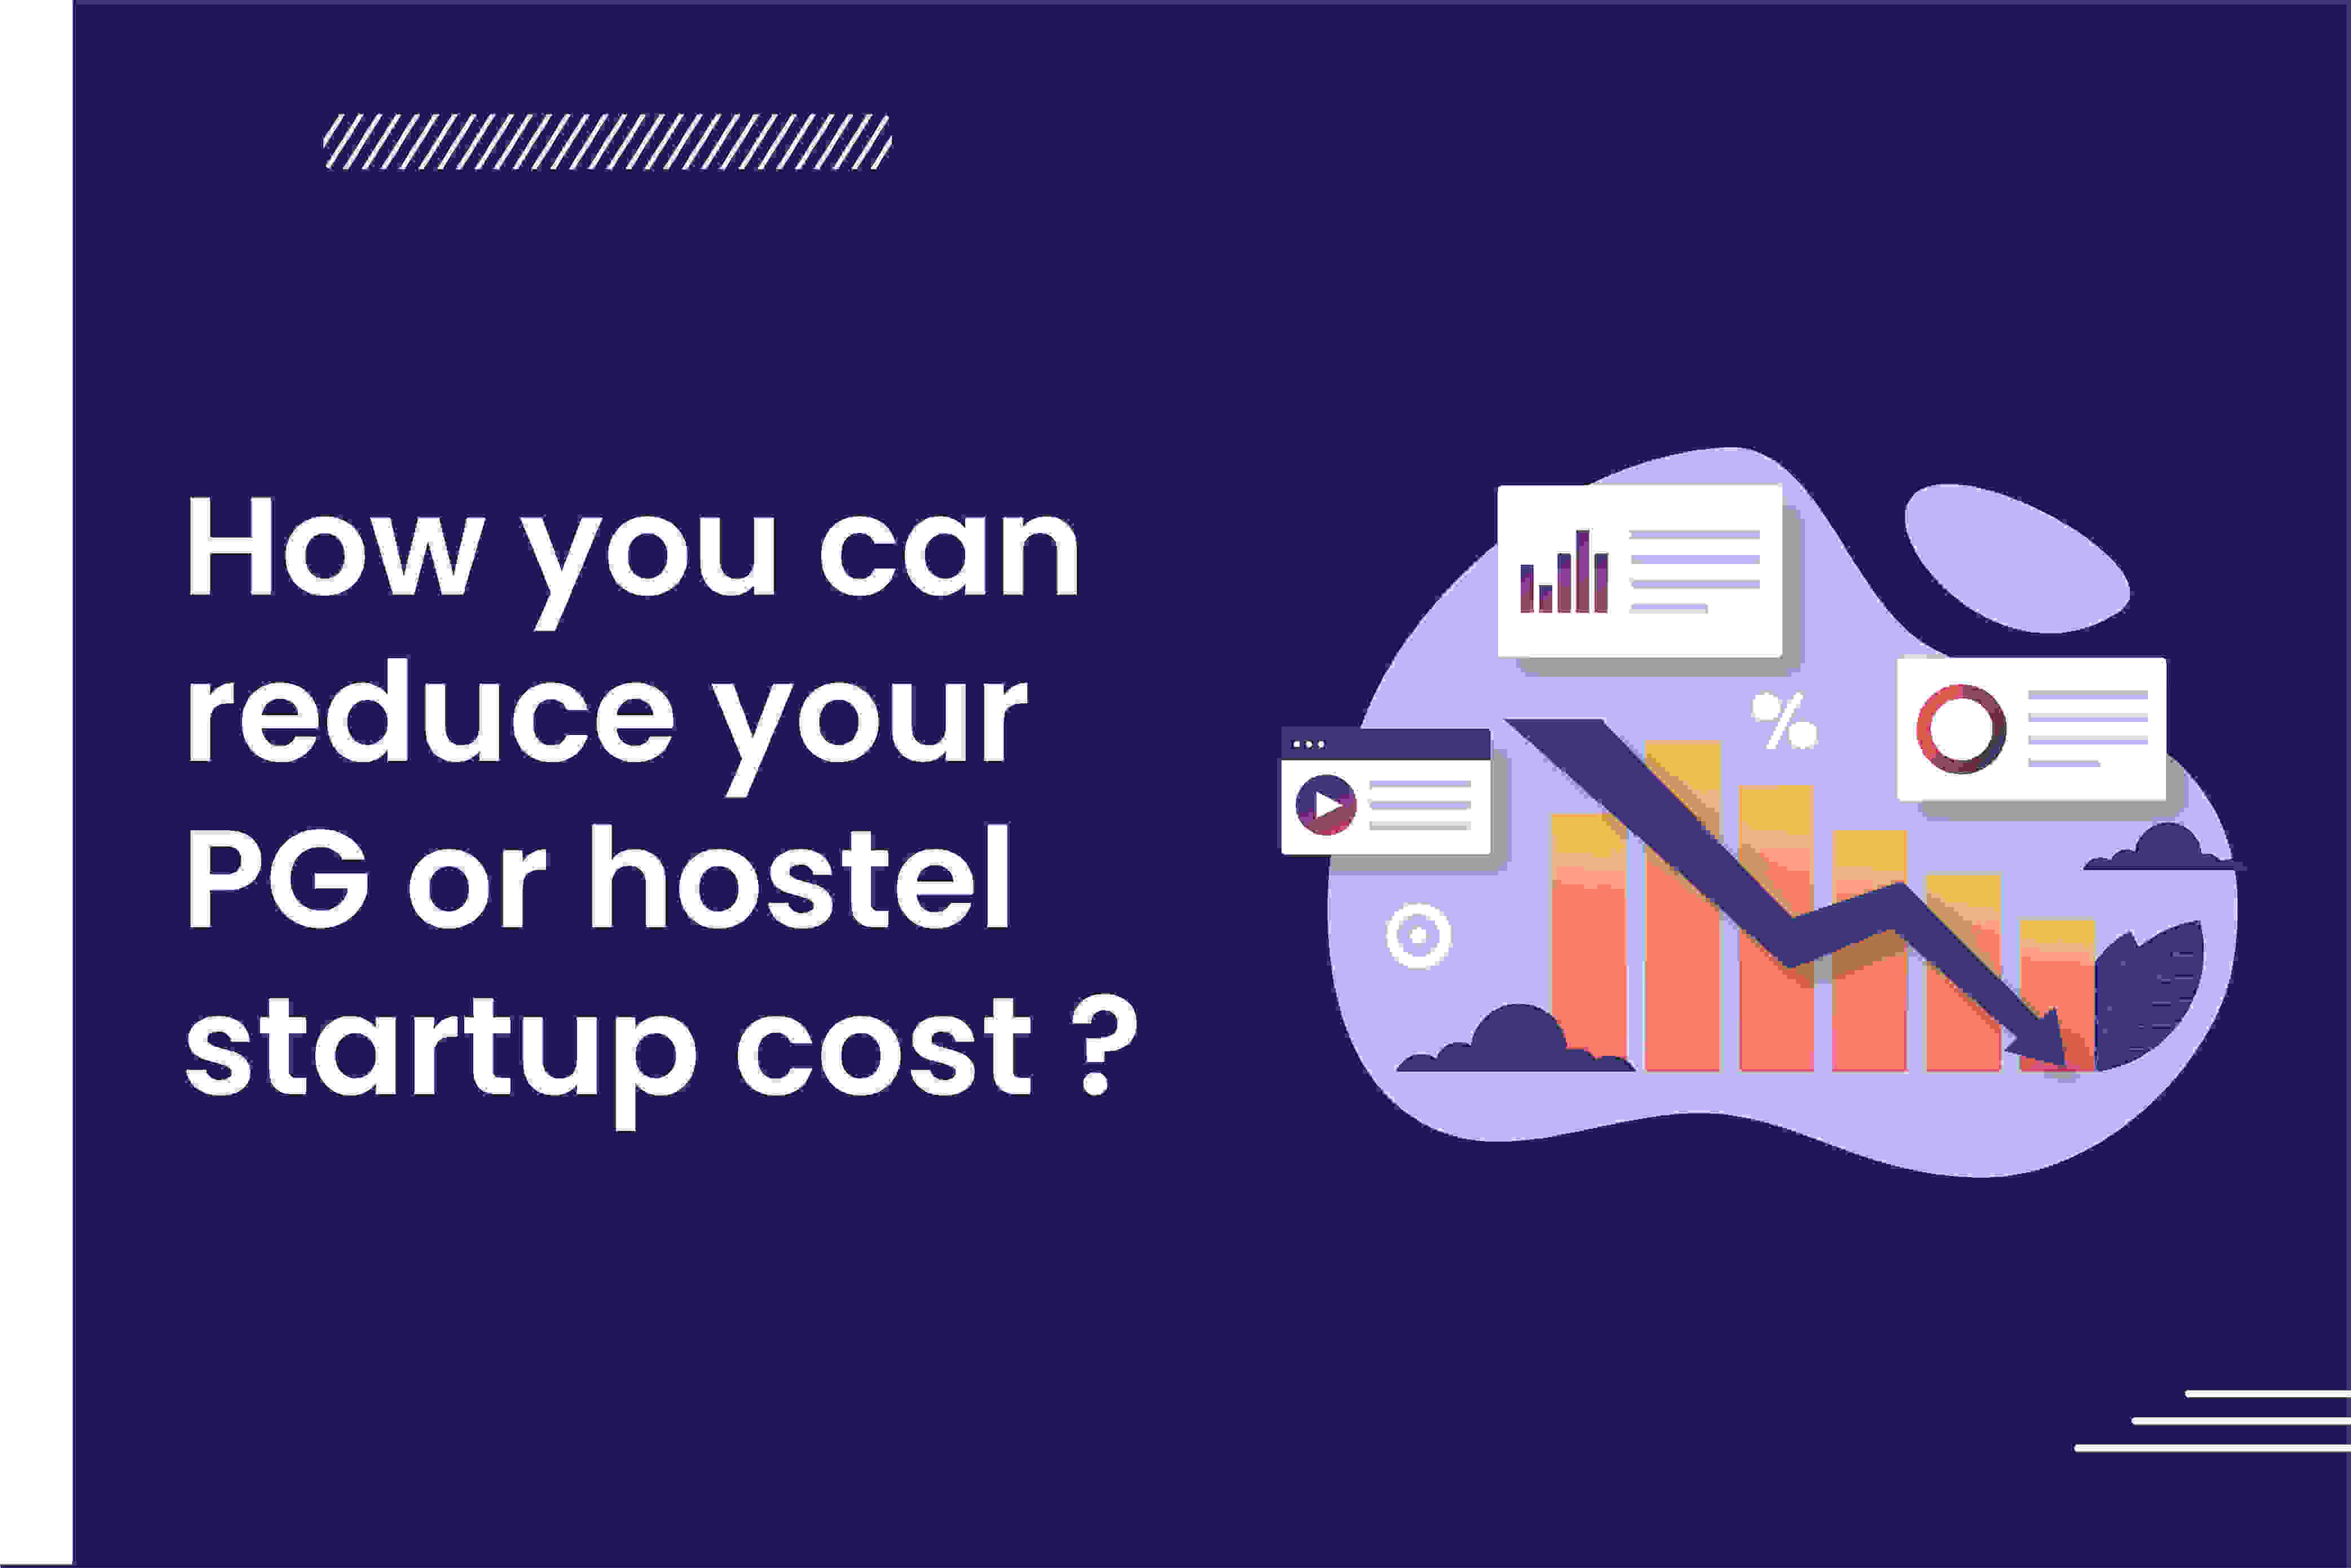 How you can reduce your PG or hostel startup cost?  